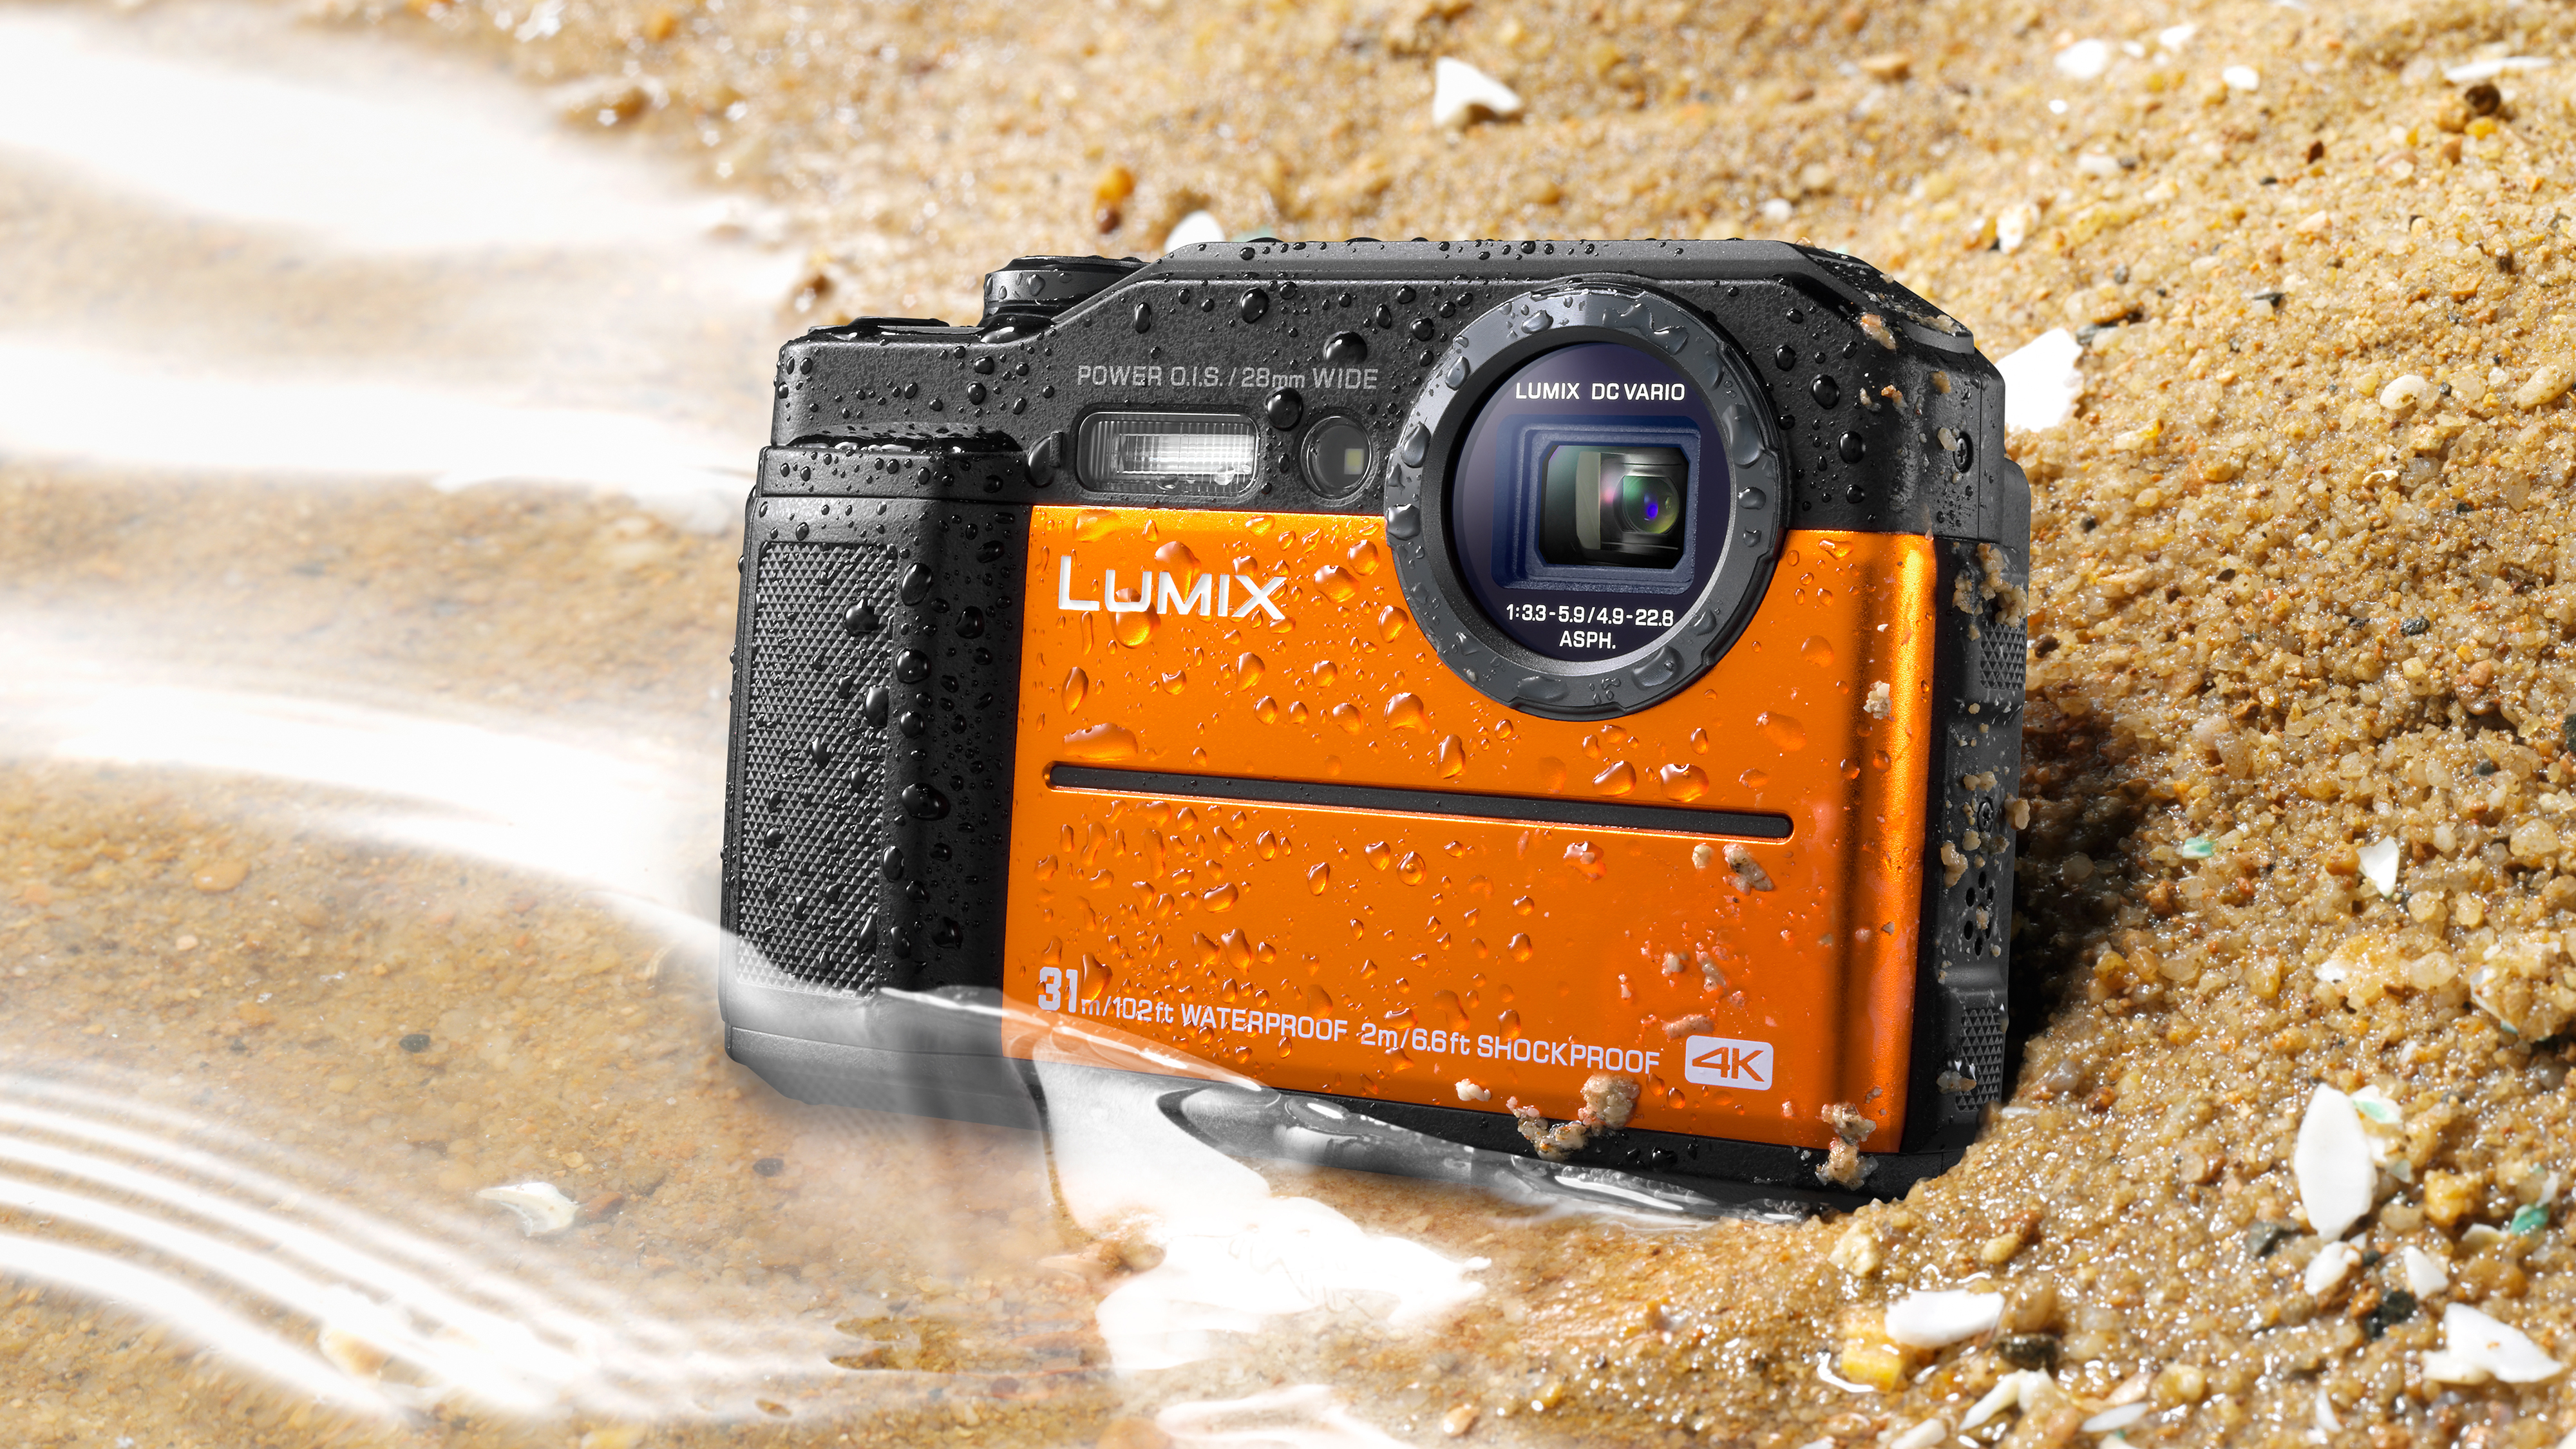 The Lumix TS7 / FT7 is Panasonic's toughest compact camera yet